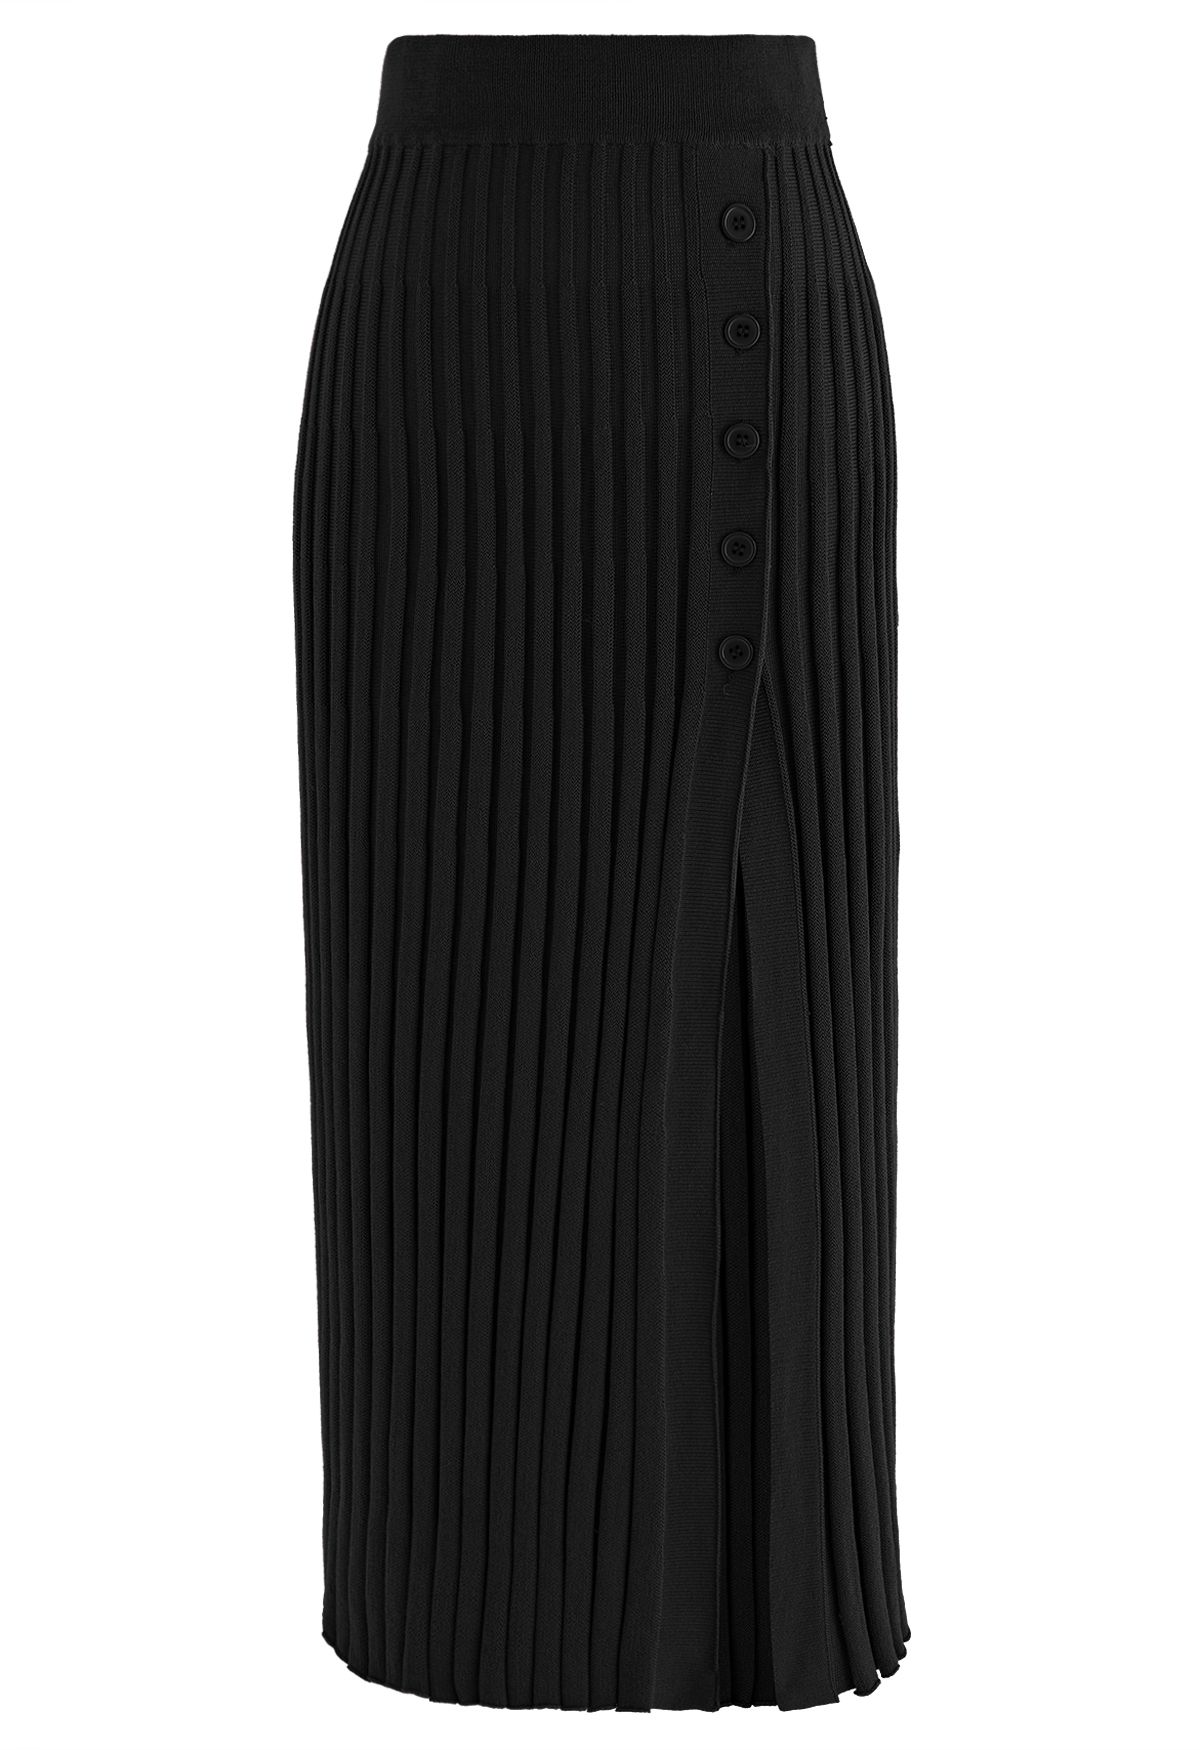 Buttoned Front Slit Rib Knit Skirt in Black